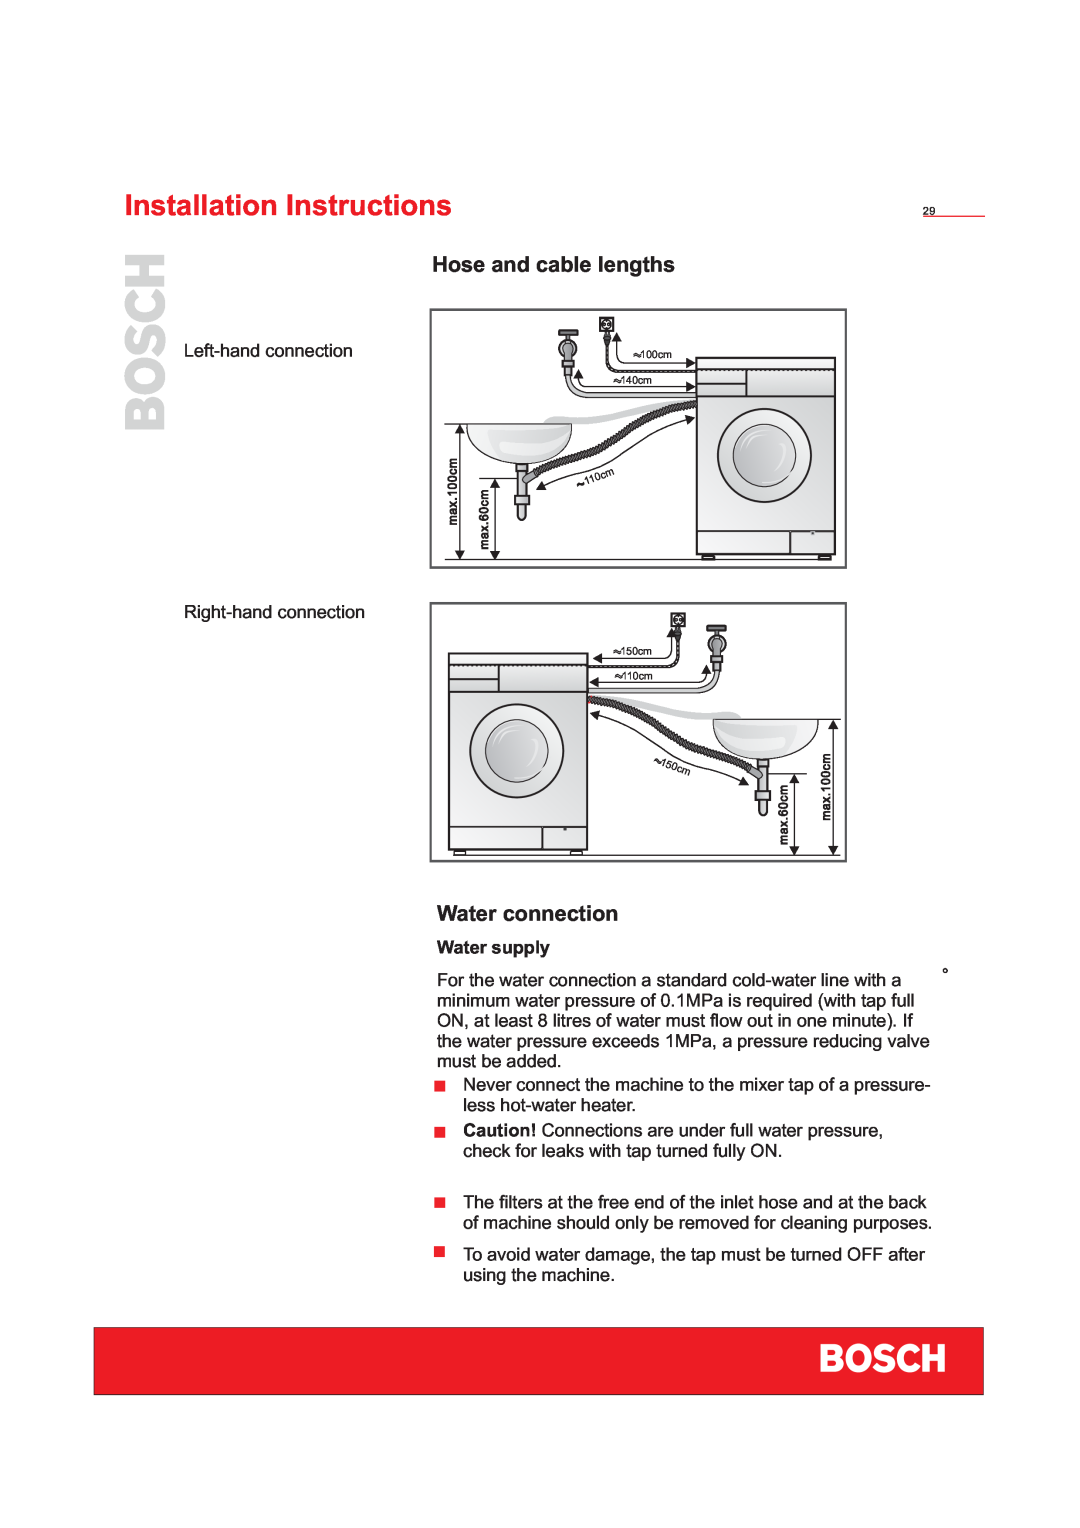 Bosch Appliances WFD50818 Hose and cable lengths, Water connection, Installation Instructions, Water supply, 150cm, 0cm6ax 